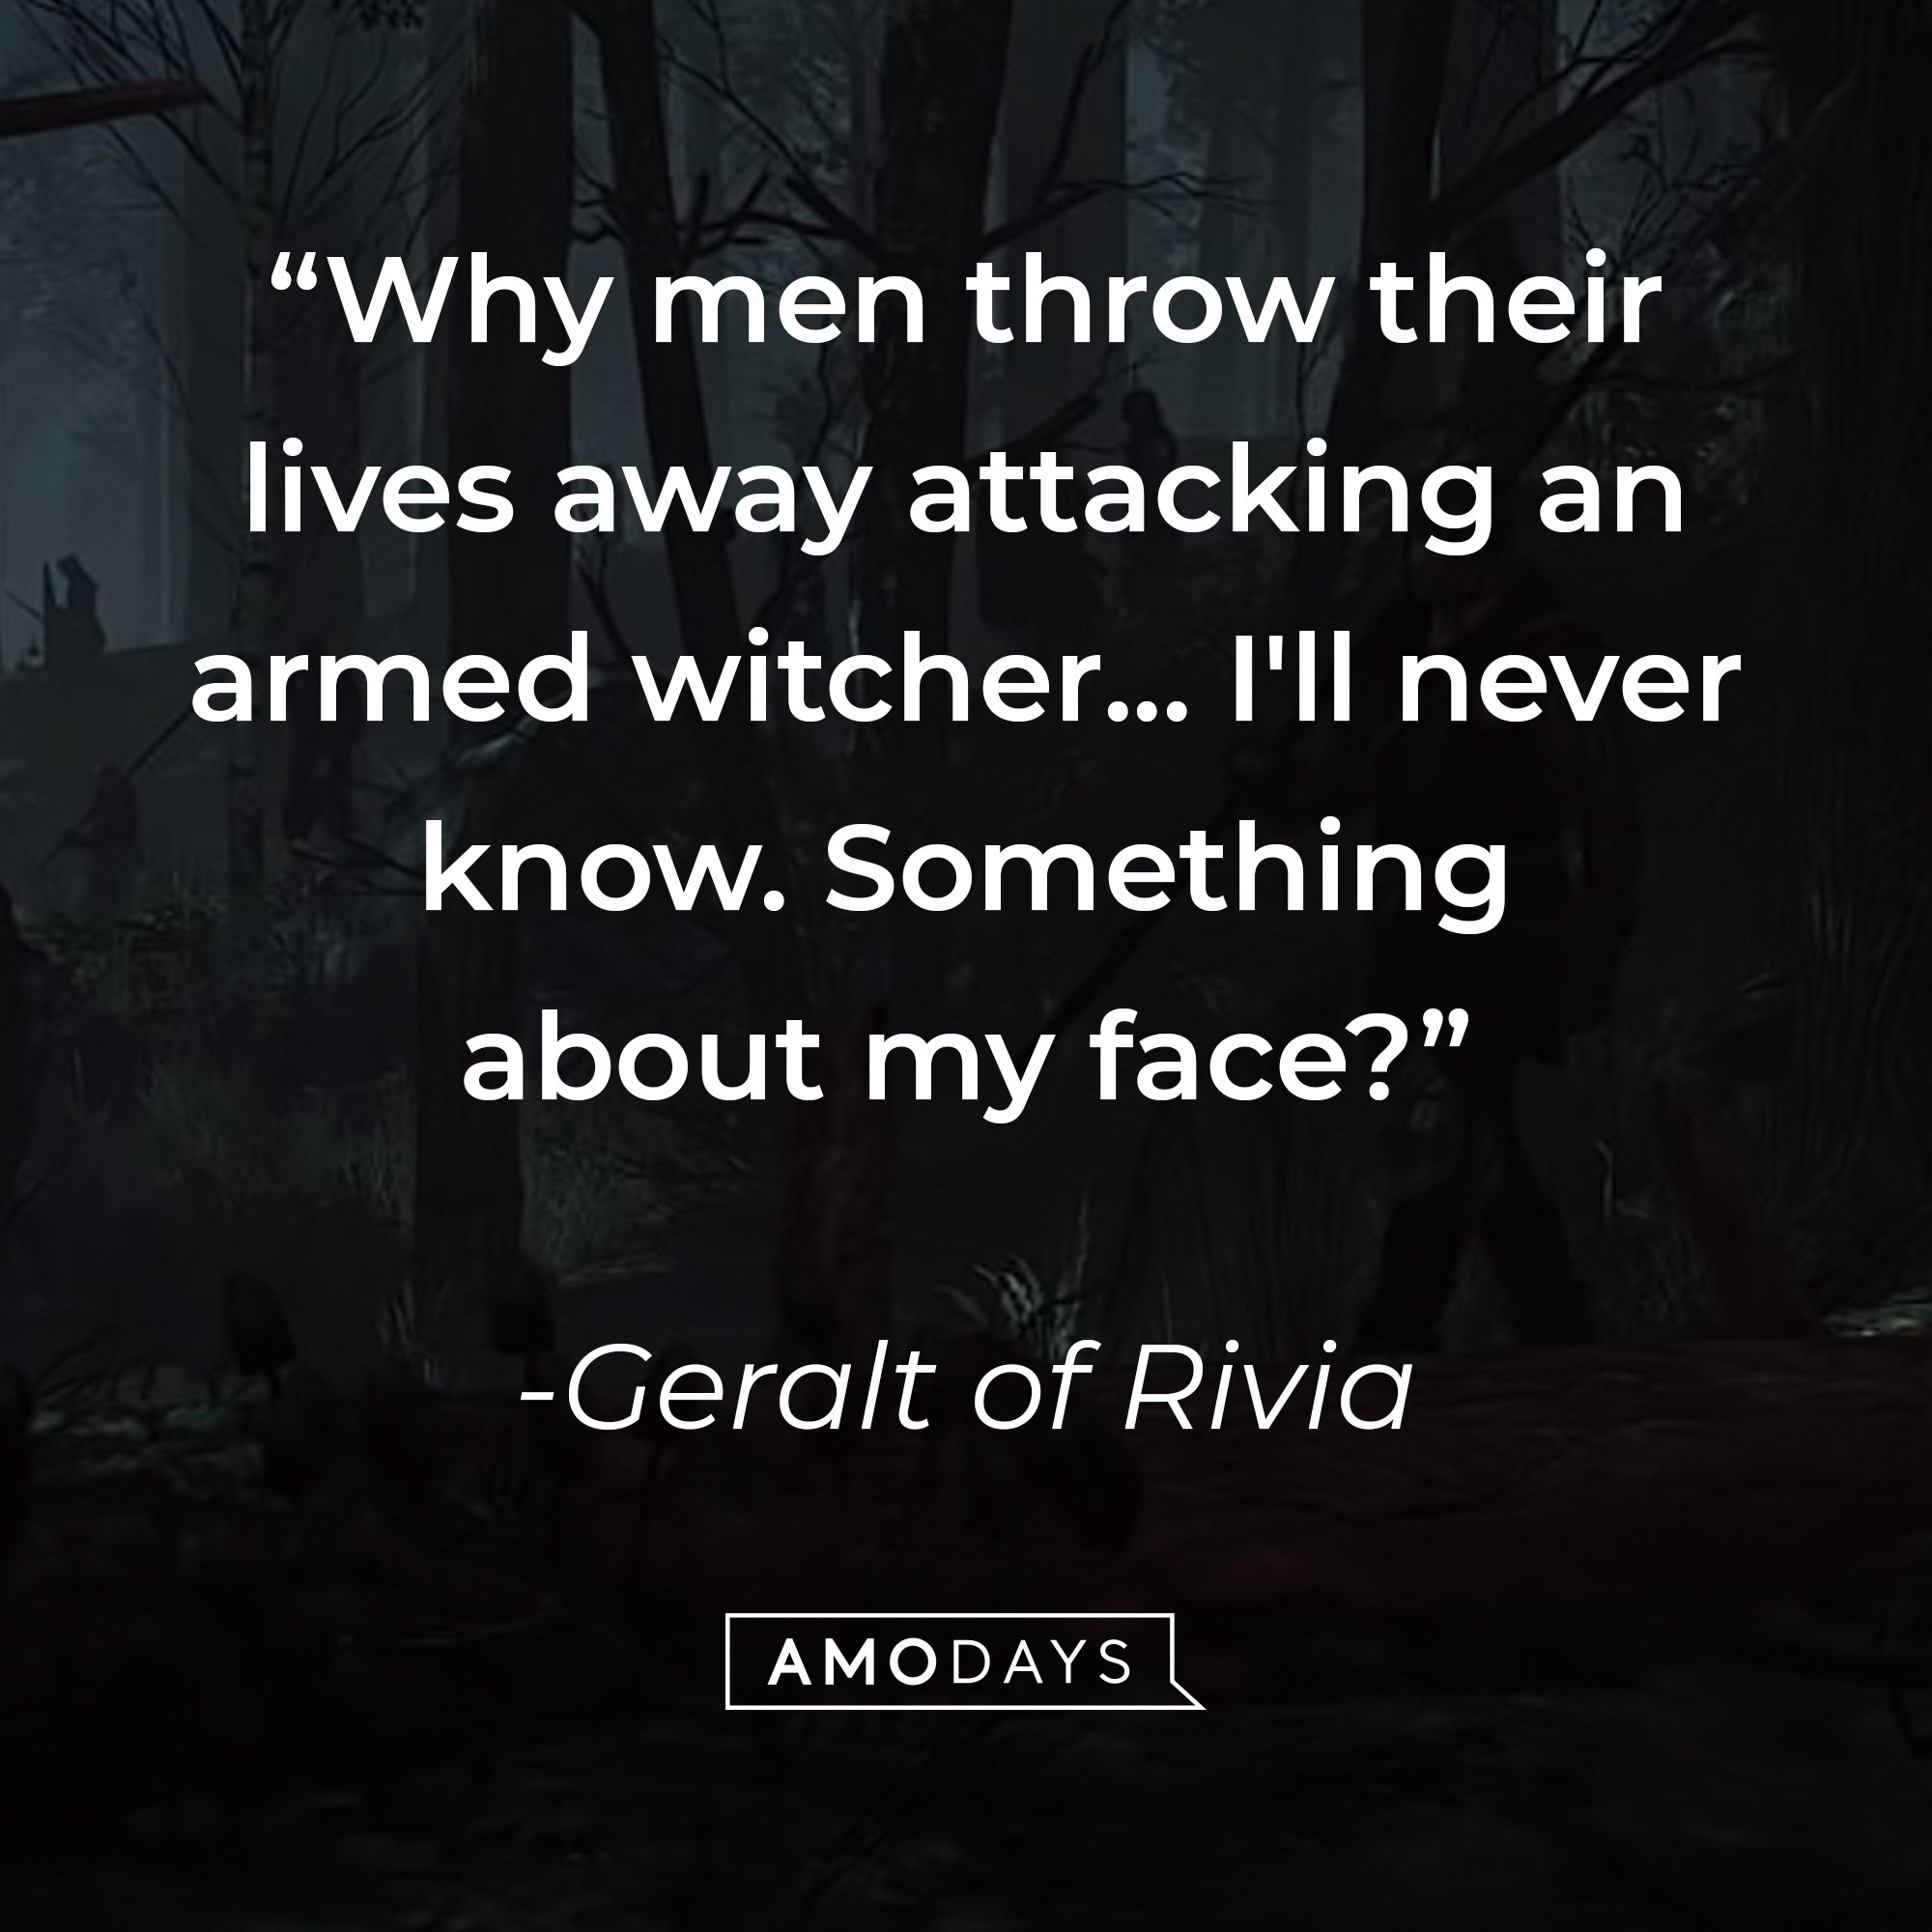 Geralt of Rivia's quote: "Why men throw their lives away attacking an armed witcher... I'll never know. Something about my face?" | Source: youtube.com/CDPRED